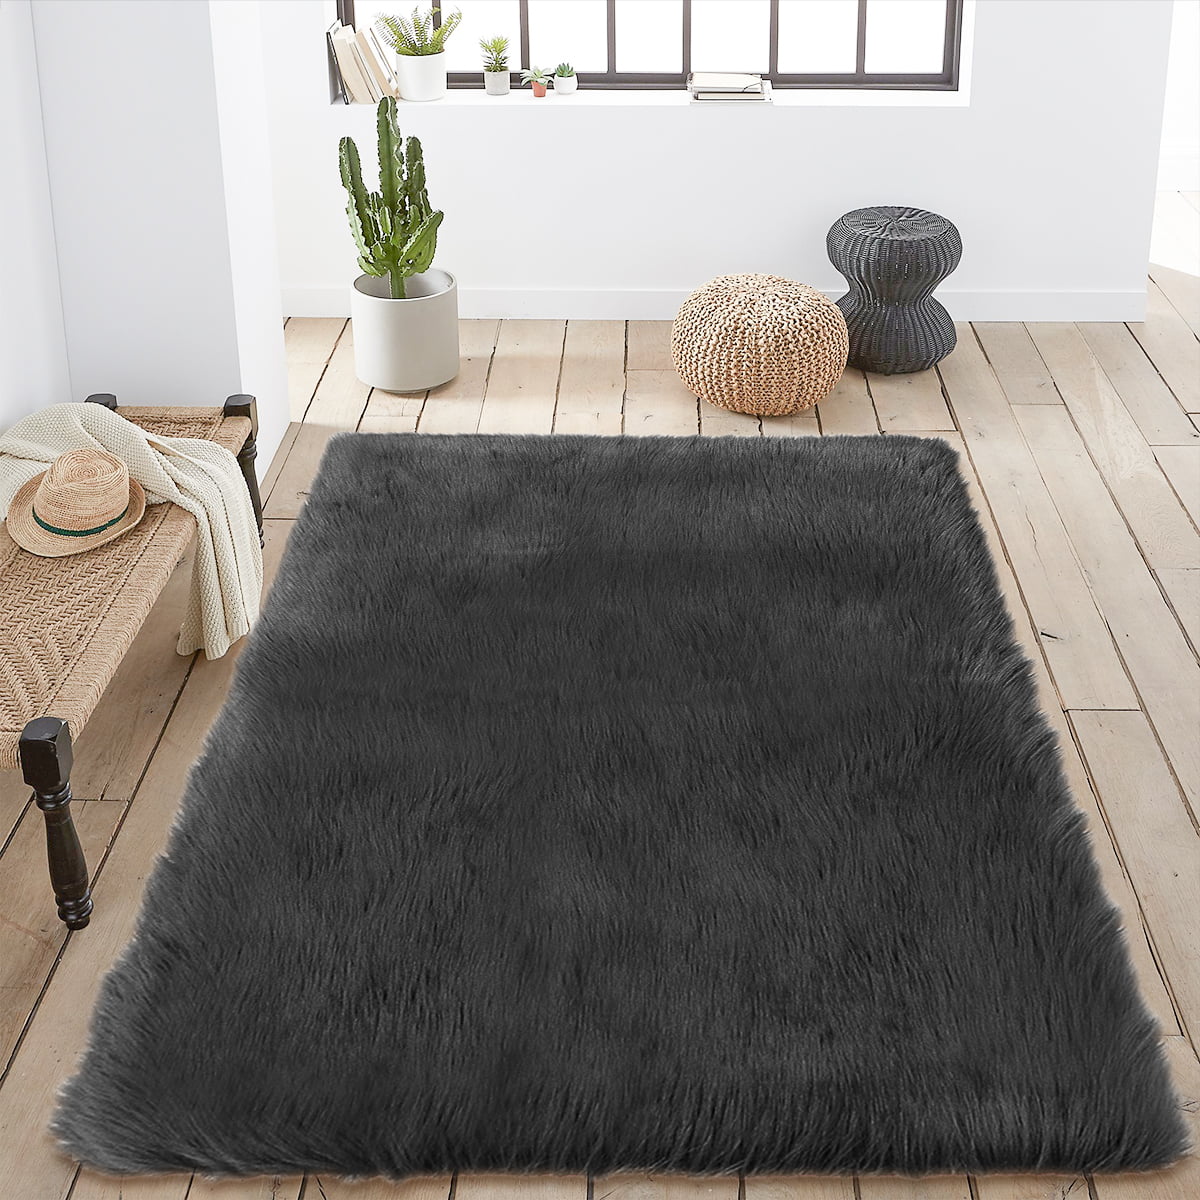 4 Size Fluffy Plain Rug Soft Faux Fur Shaggy Area Rugs Room Mats Thick Wool 